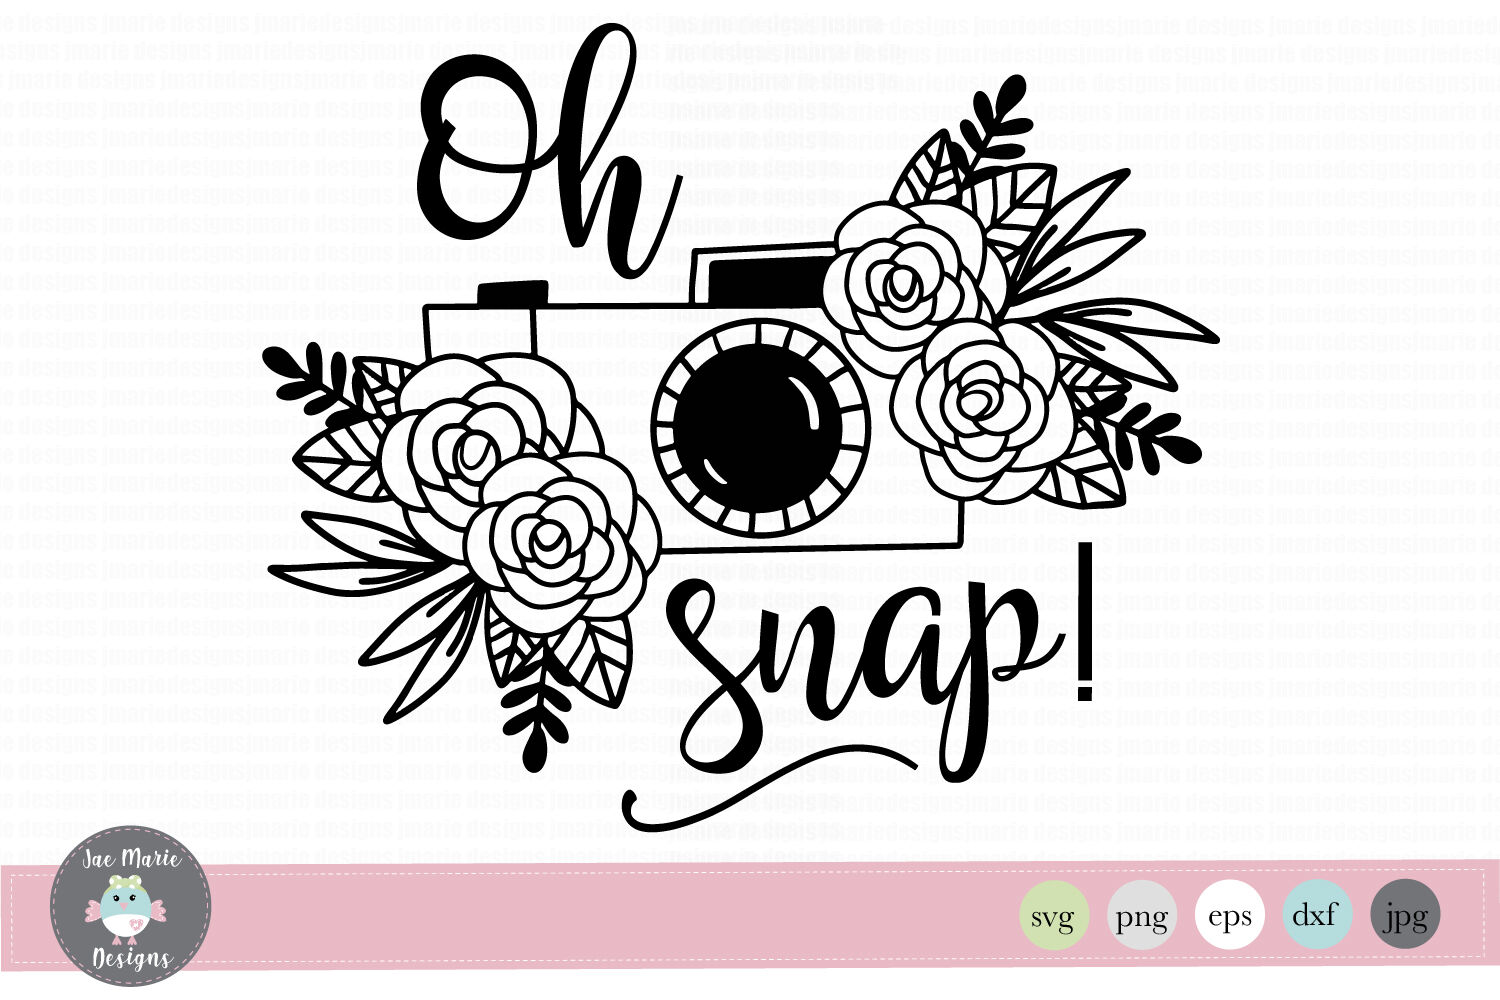 Download camera svg, photography svg, photographer svg By Jae Marie ...